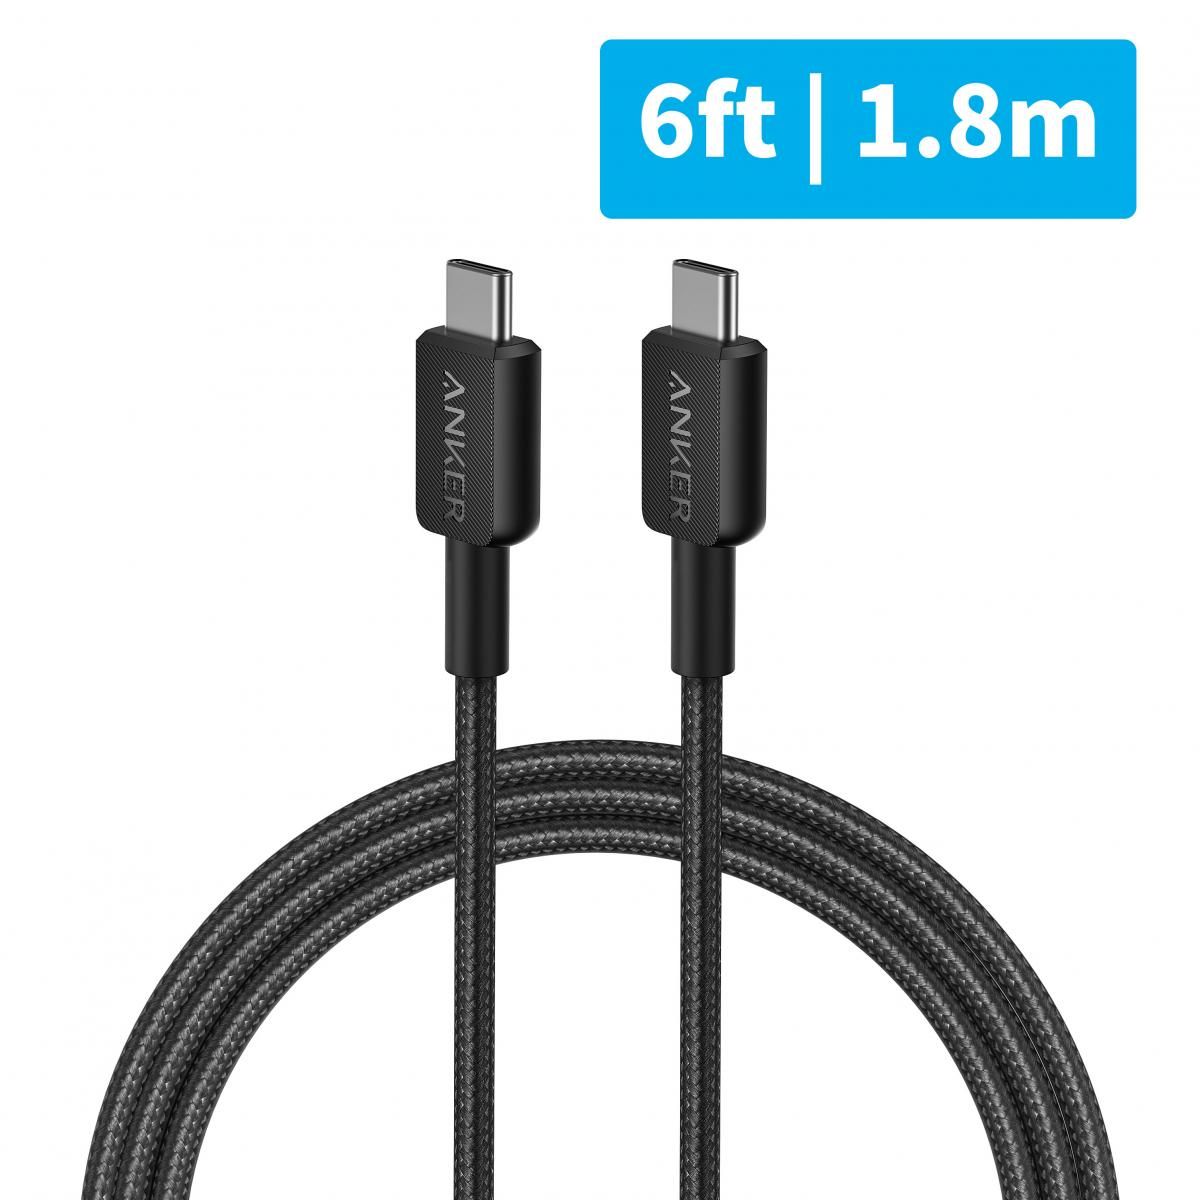 Anker 322 A81F6 USB-C To USB-C Cable Black